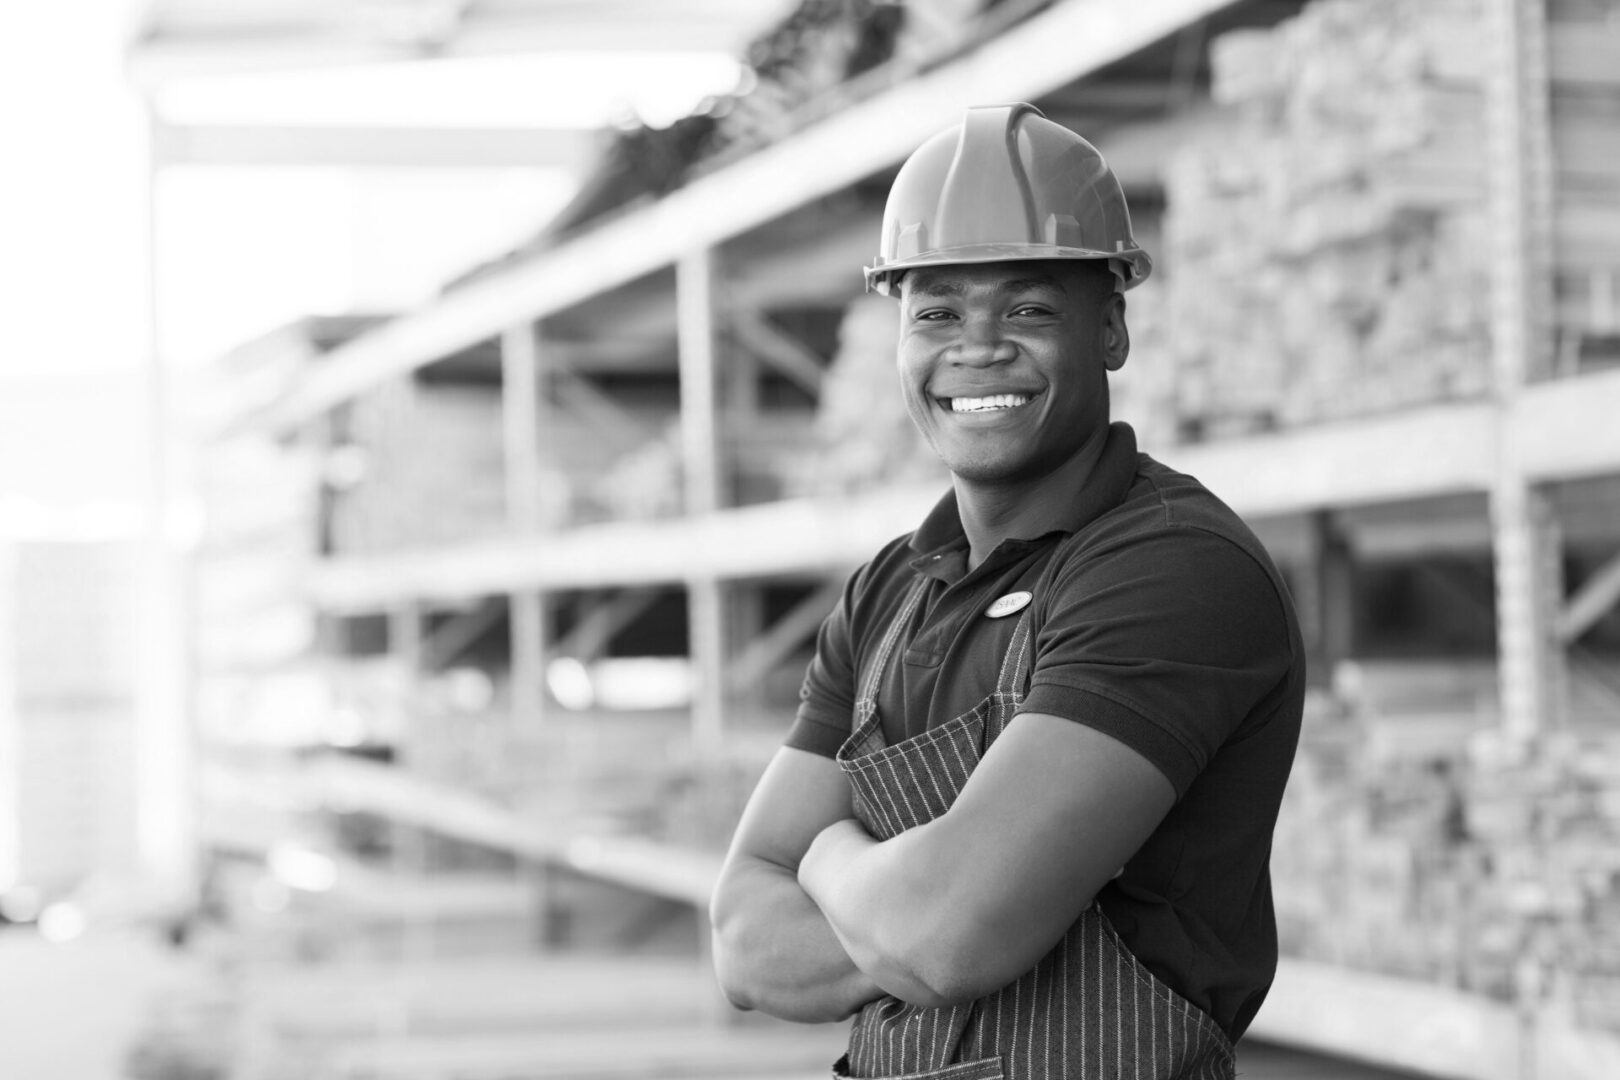 happy african industrial worker standing at building material warehouse